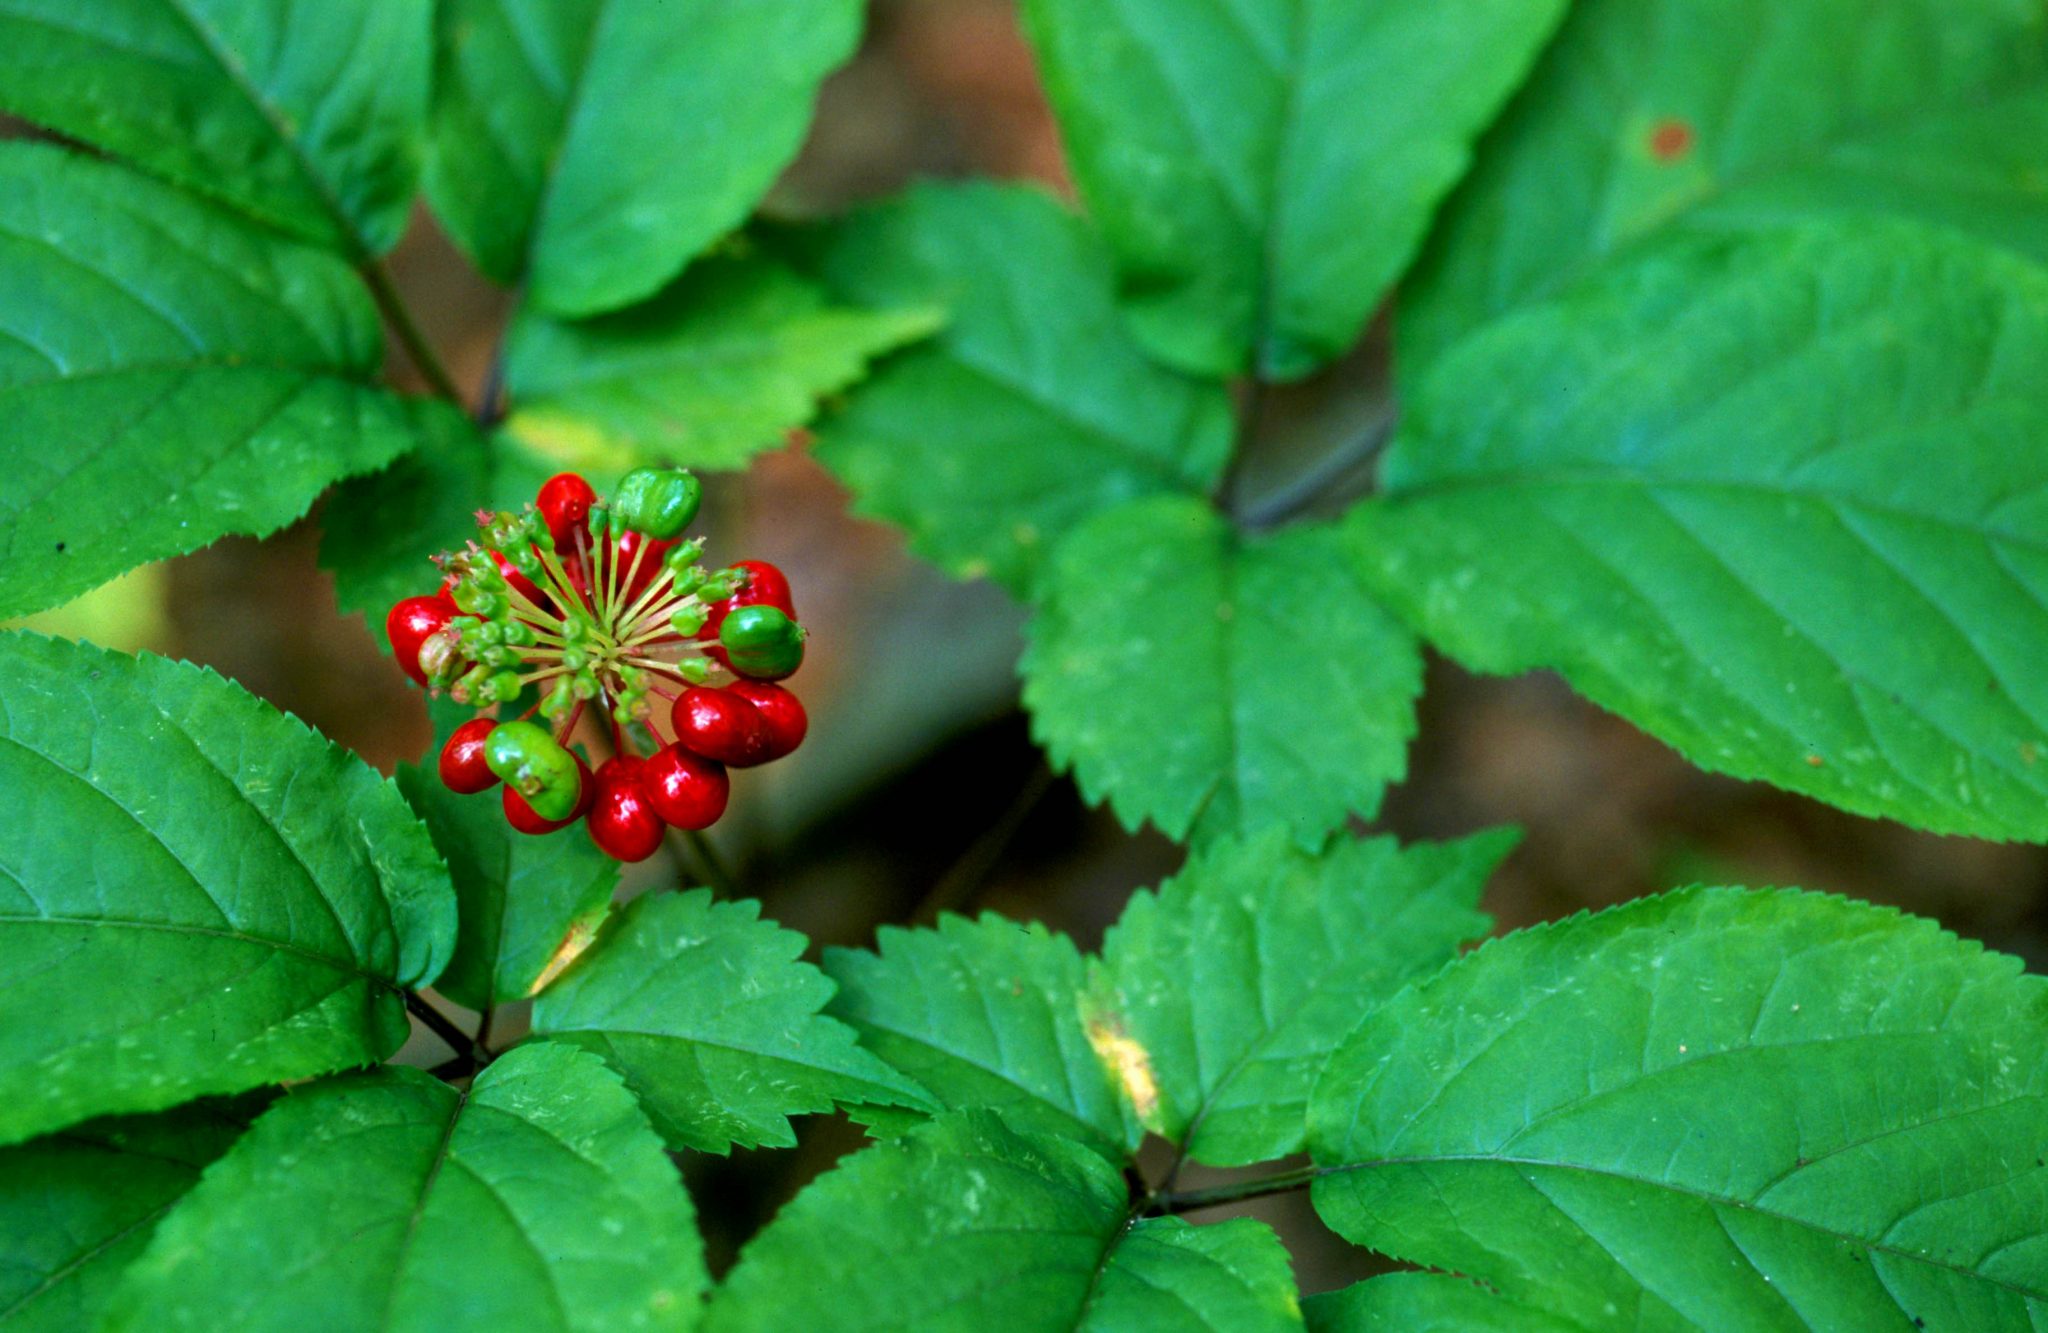 Federal prosecutors said East Tennessee ginseng dealer skirted state